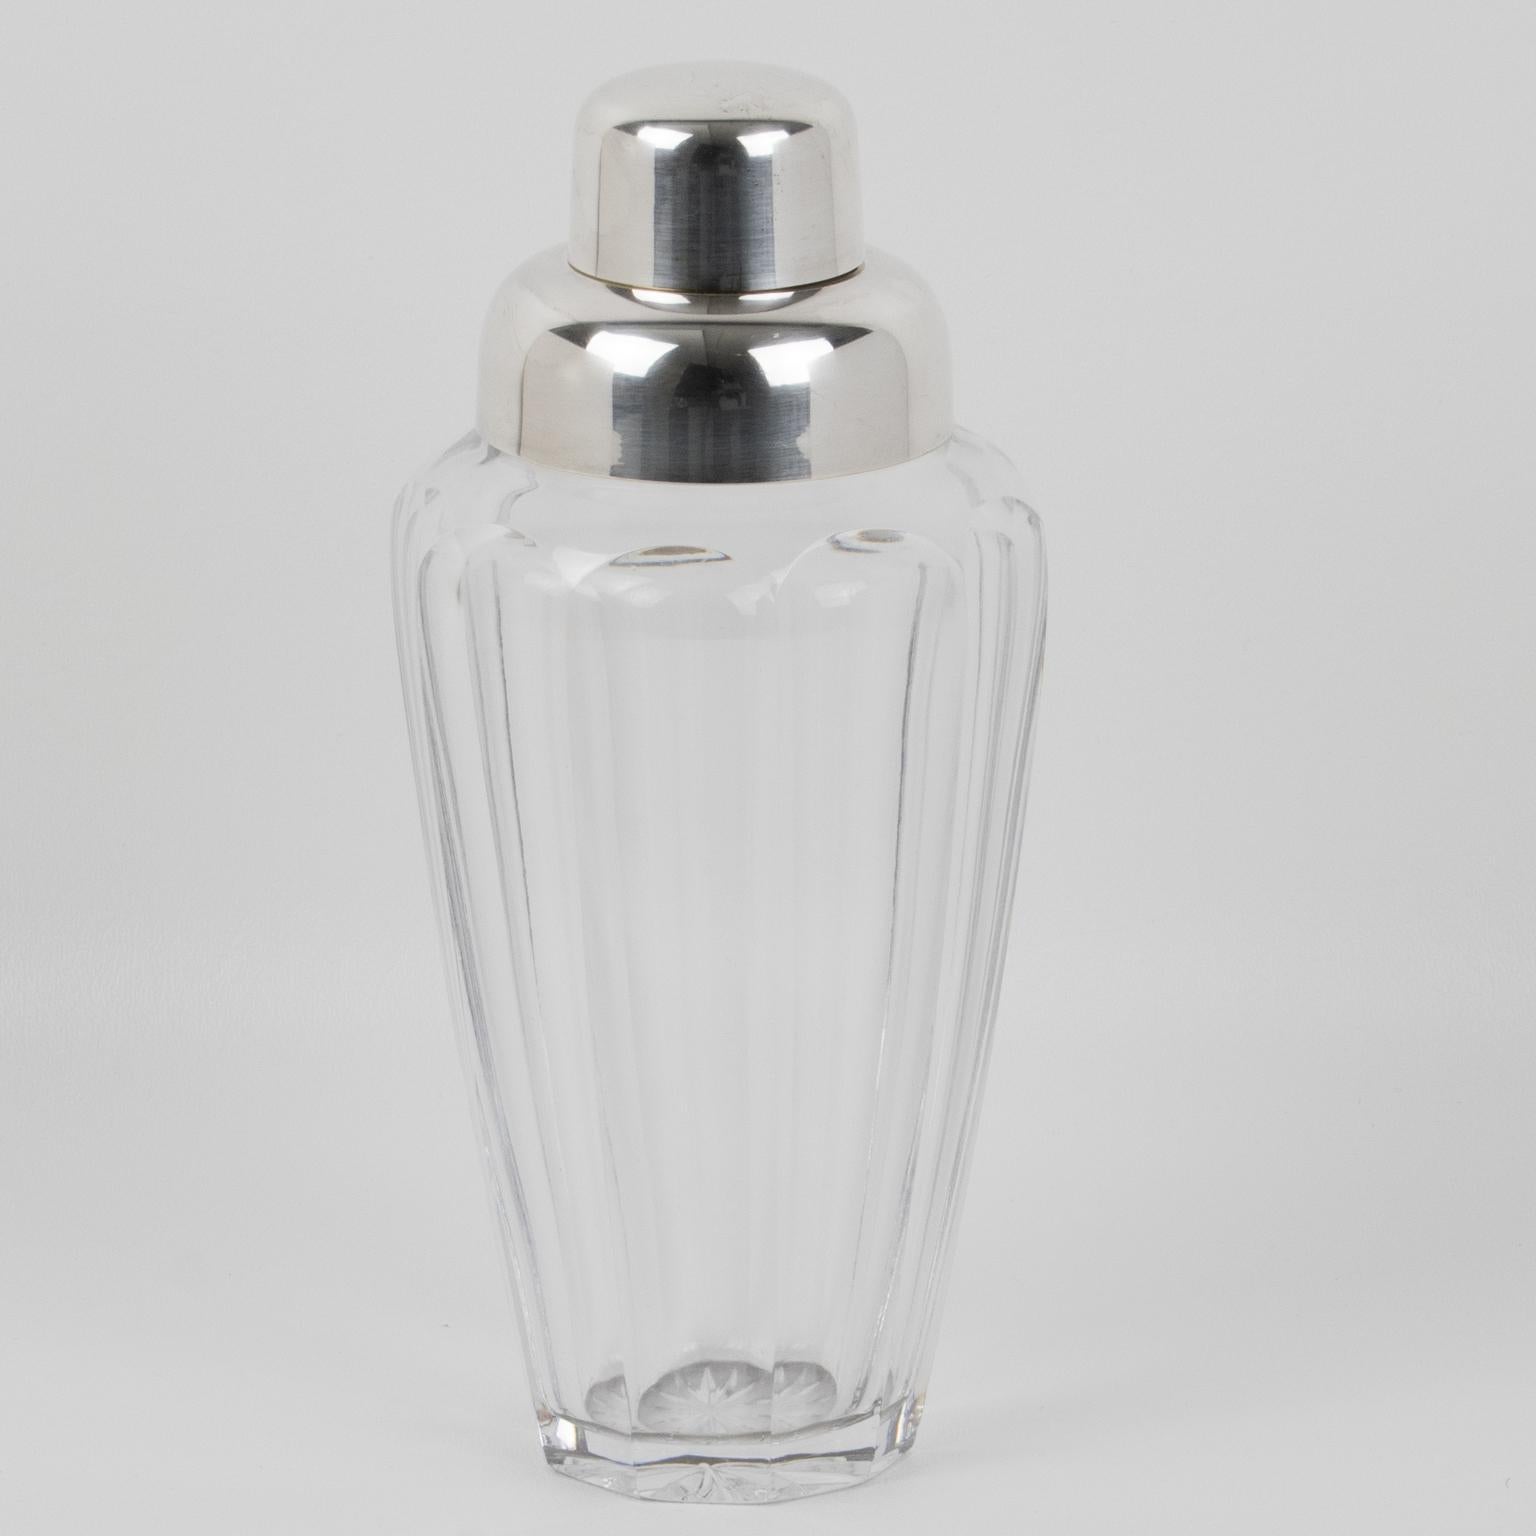 This exquisite mid-century silver-plated and crystal cocktail or Martini shaker was manufactured in Germany in the 1950s. It's a three-cylindrical sectioned design with a removable cap and strainer. The shaker boasts a beautifully carved cut crystal